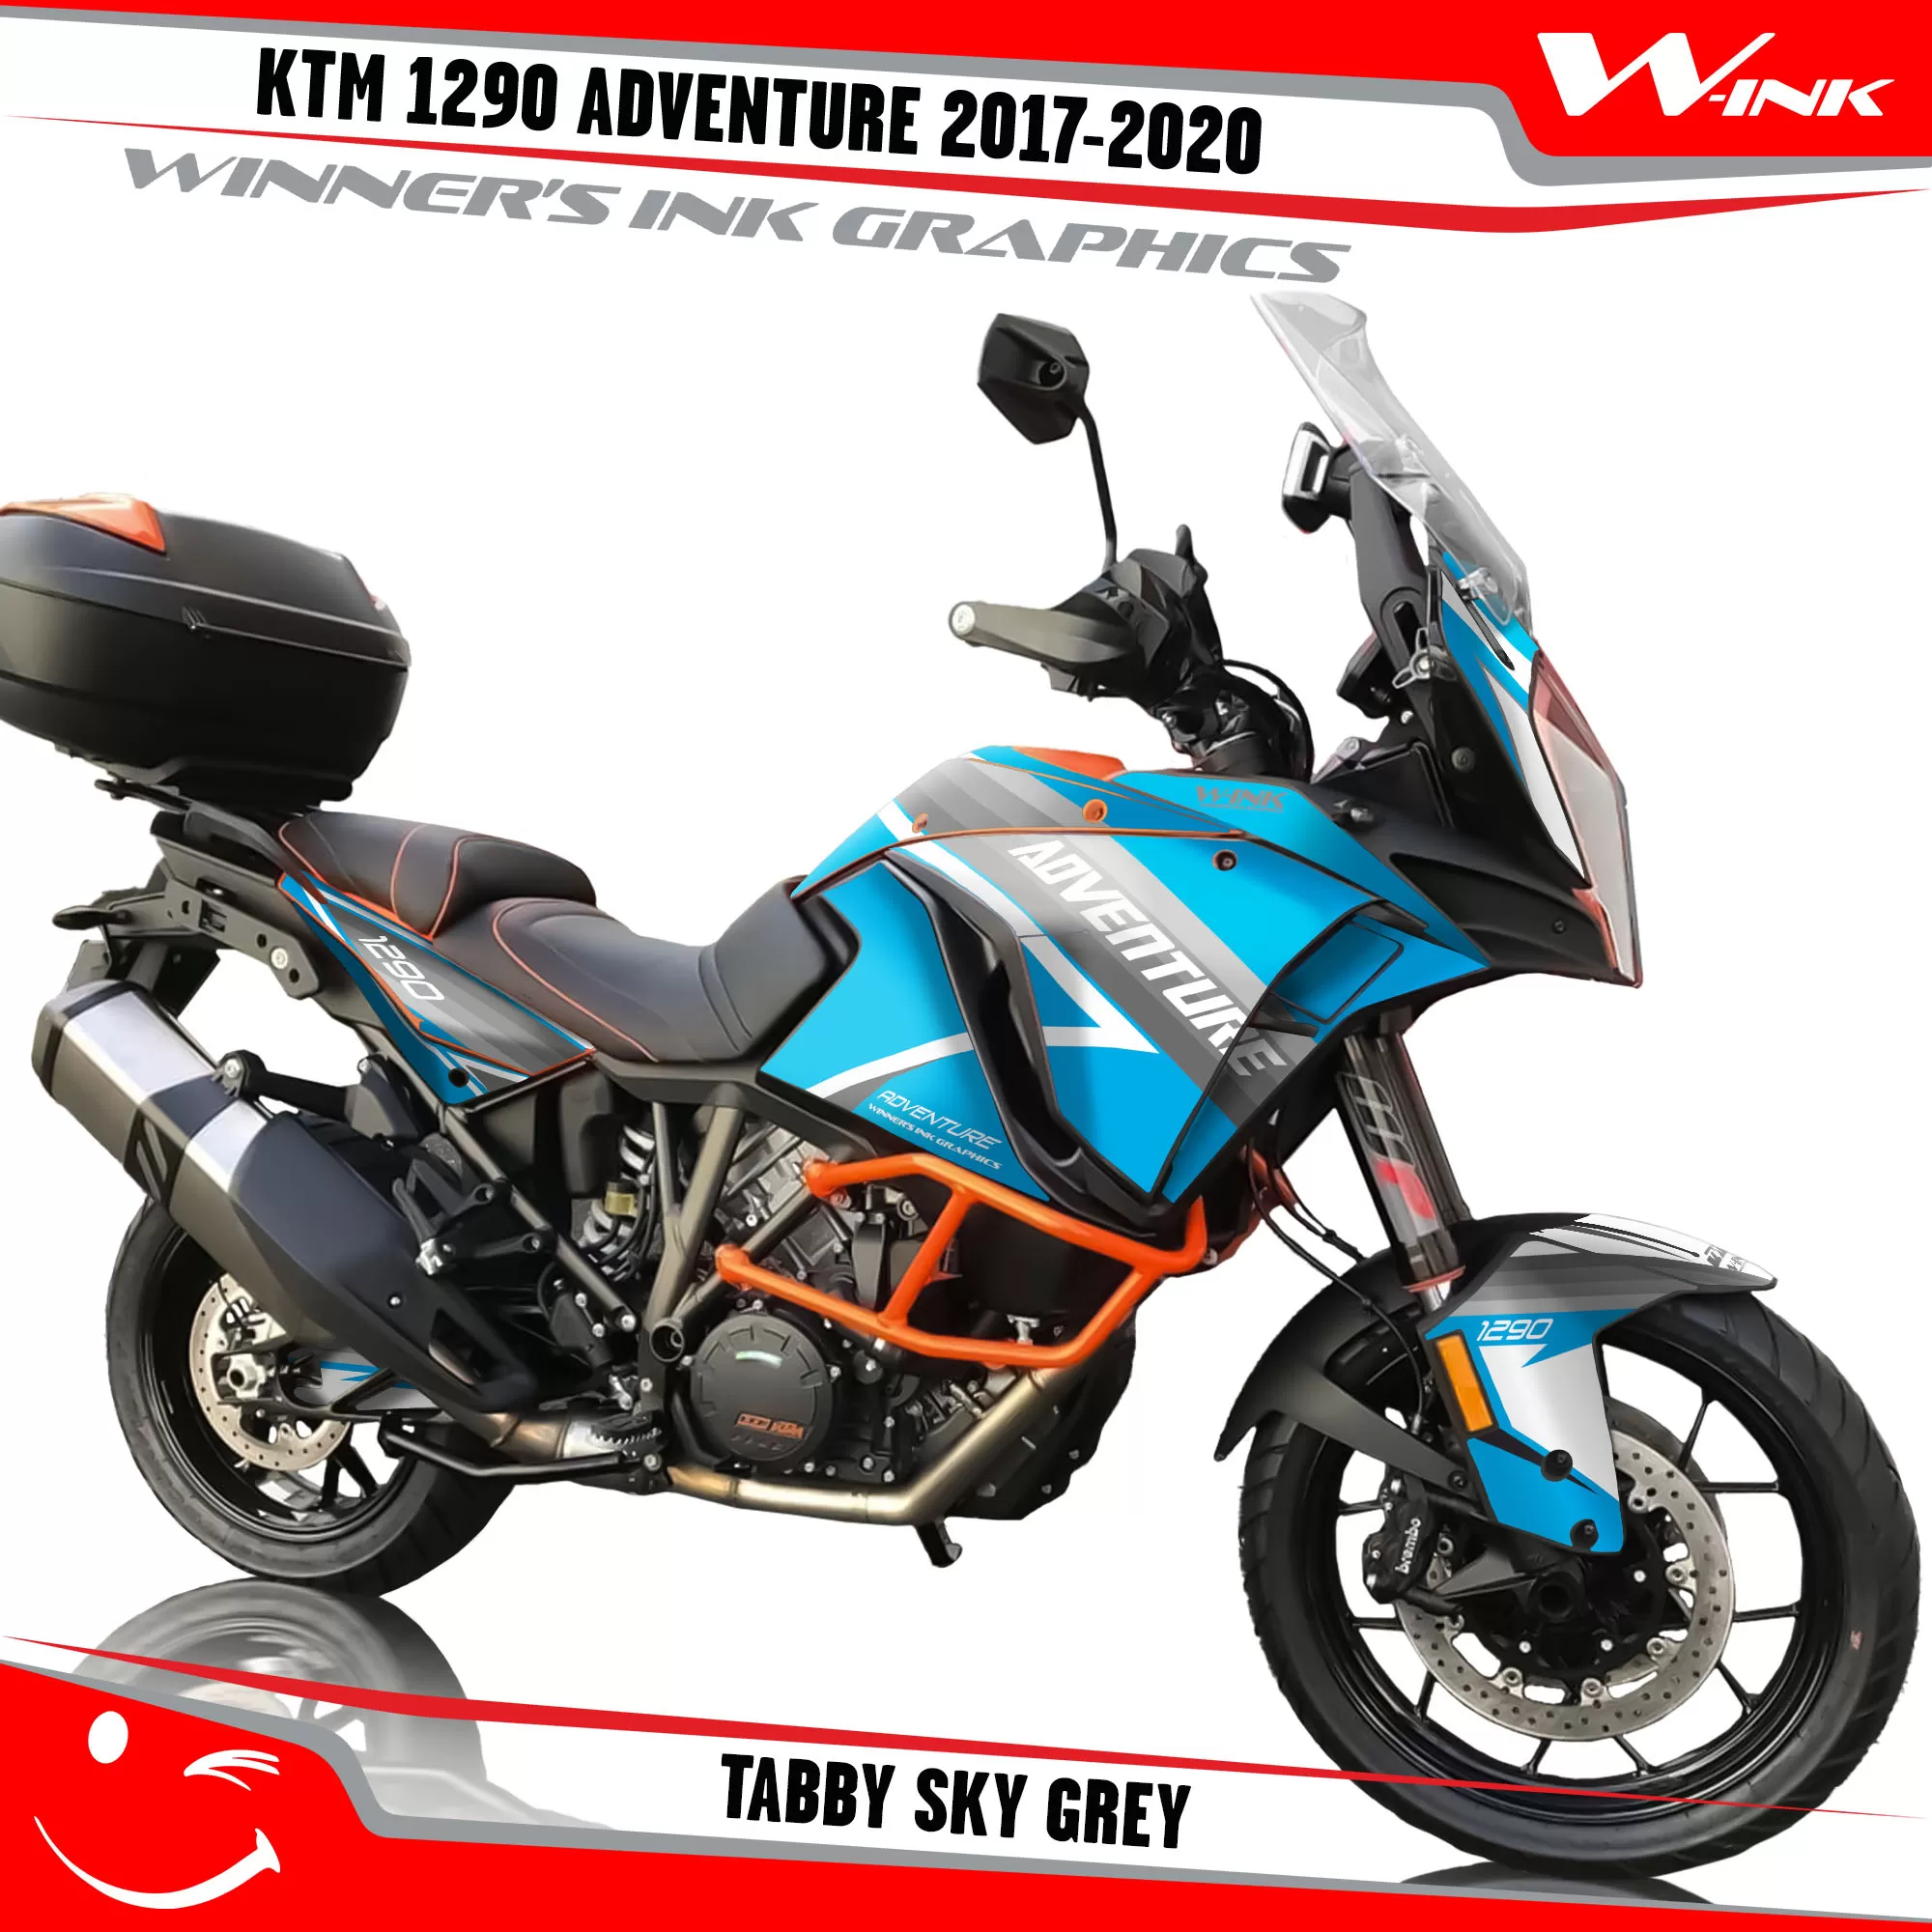 KTM-Adventure-1290-2017-2018-2019-2020-graphics-kit-and-decals-Tabby-Sky-Grey